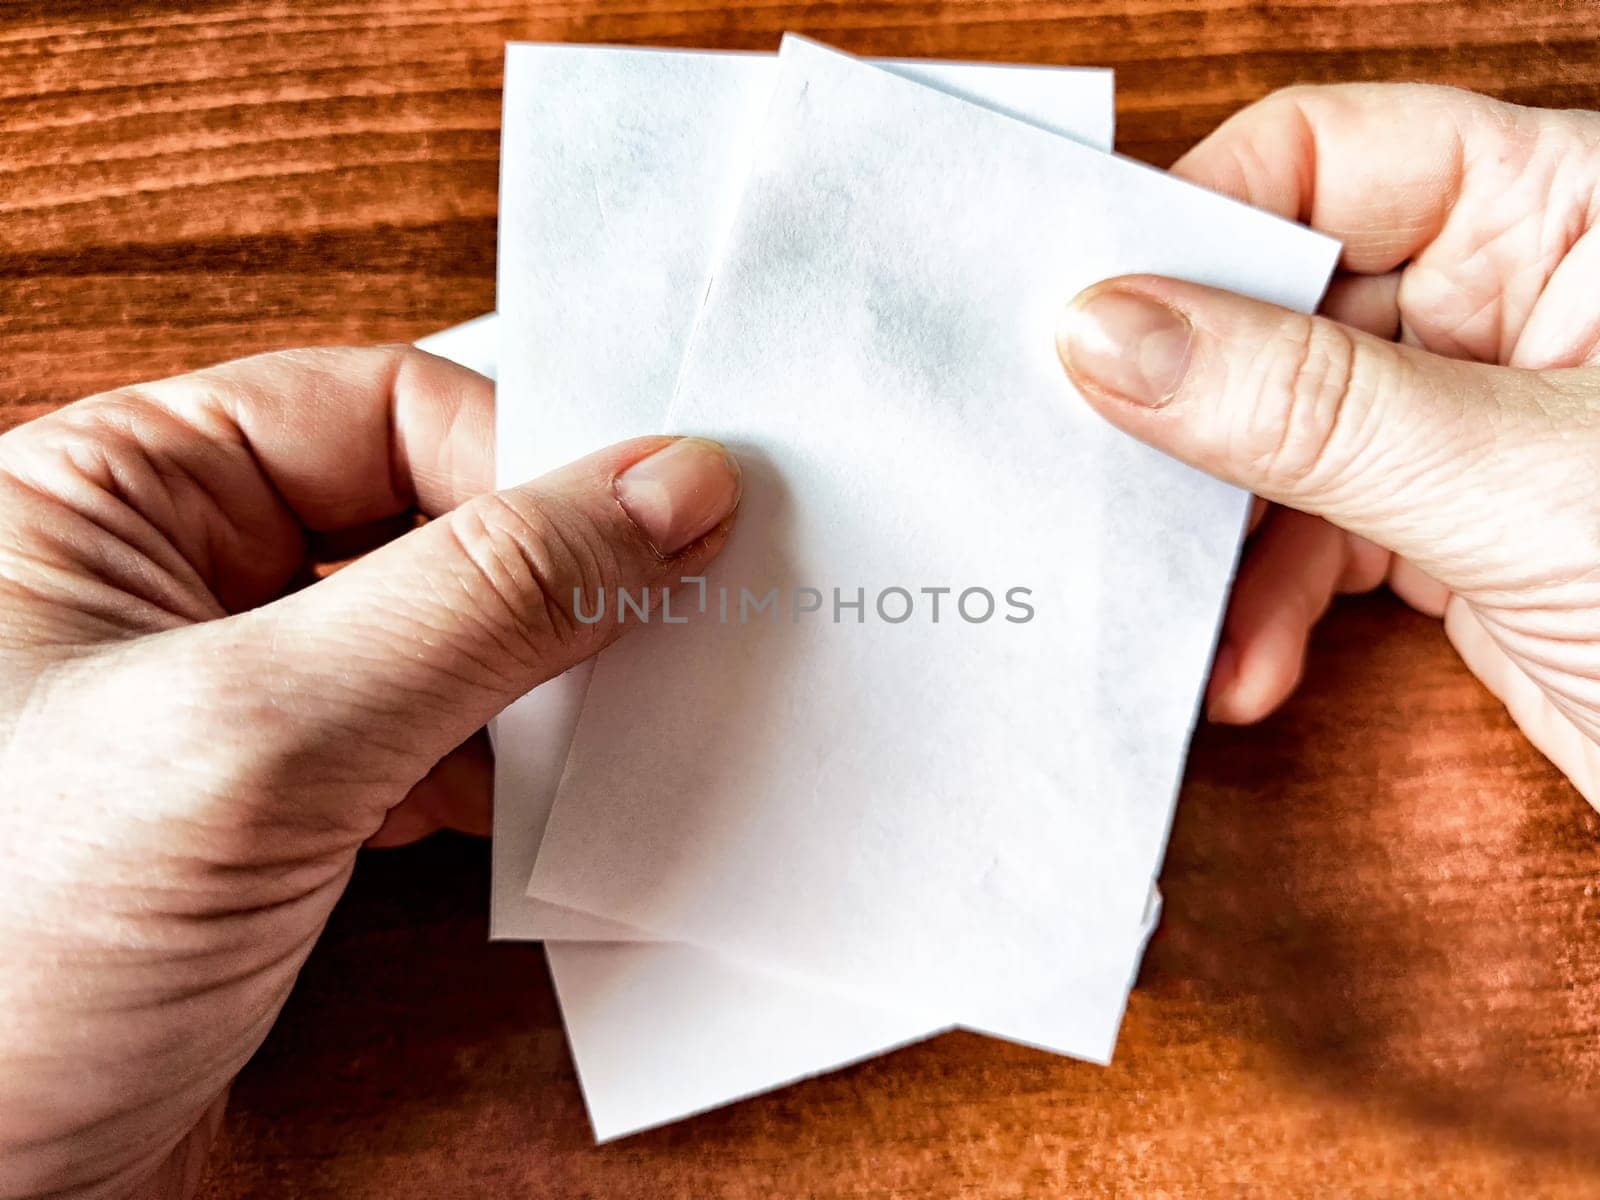 Woman Holding Small White Papers Over a Wooden Surface. Hands presenting several small white papers by keleny